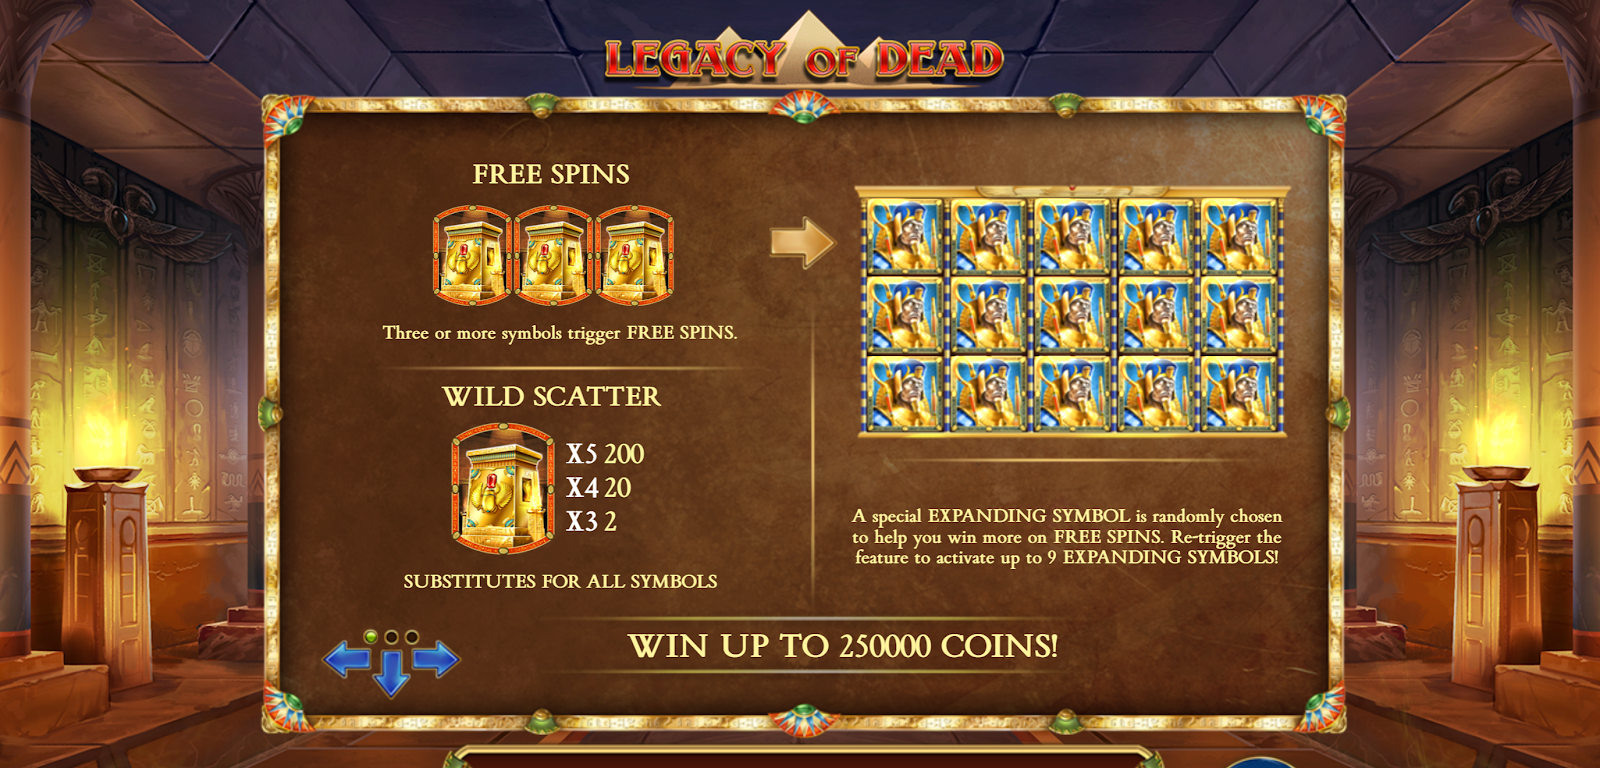  Legacy of Dead offers you the chance to win up to 250000 coins